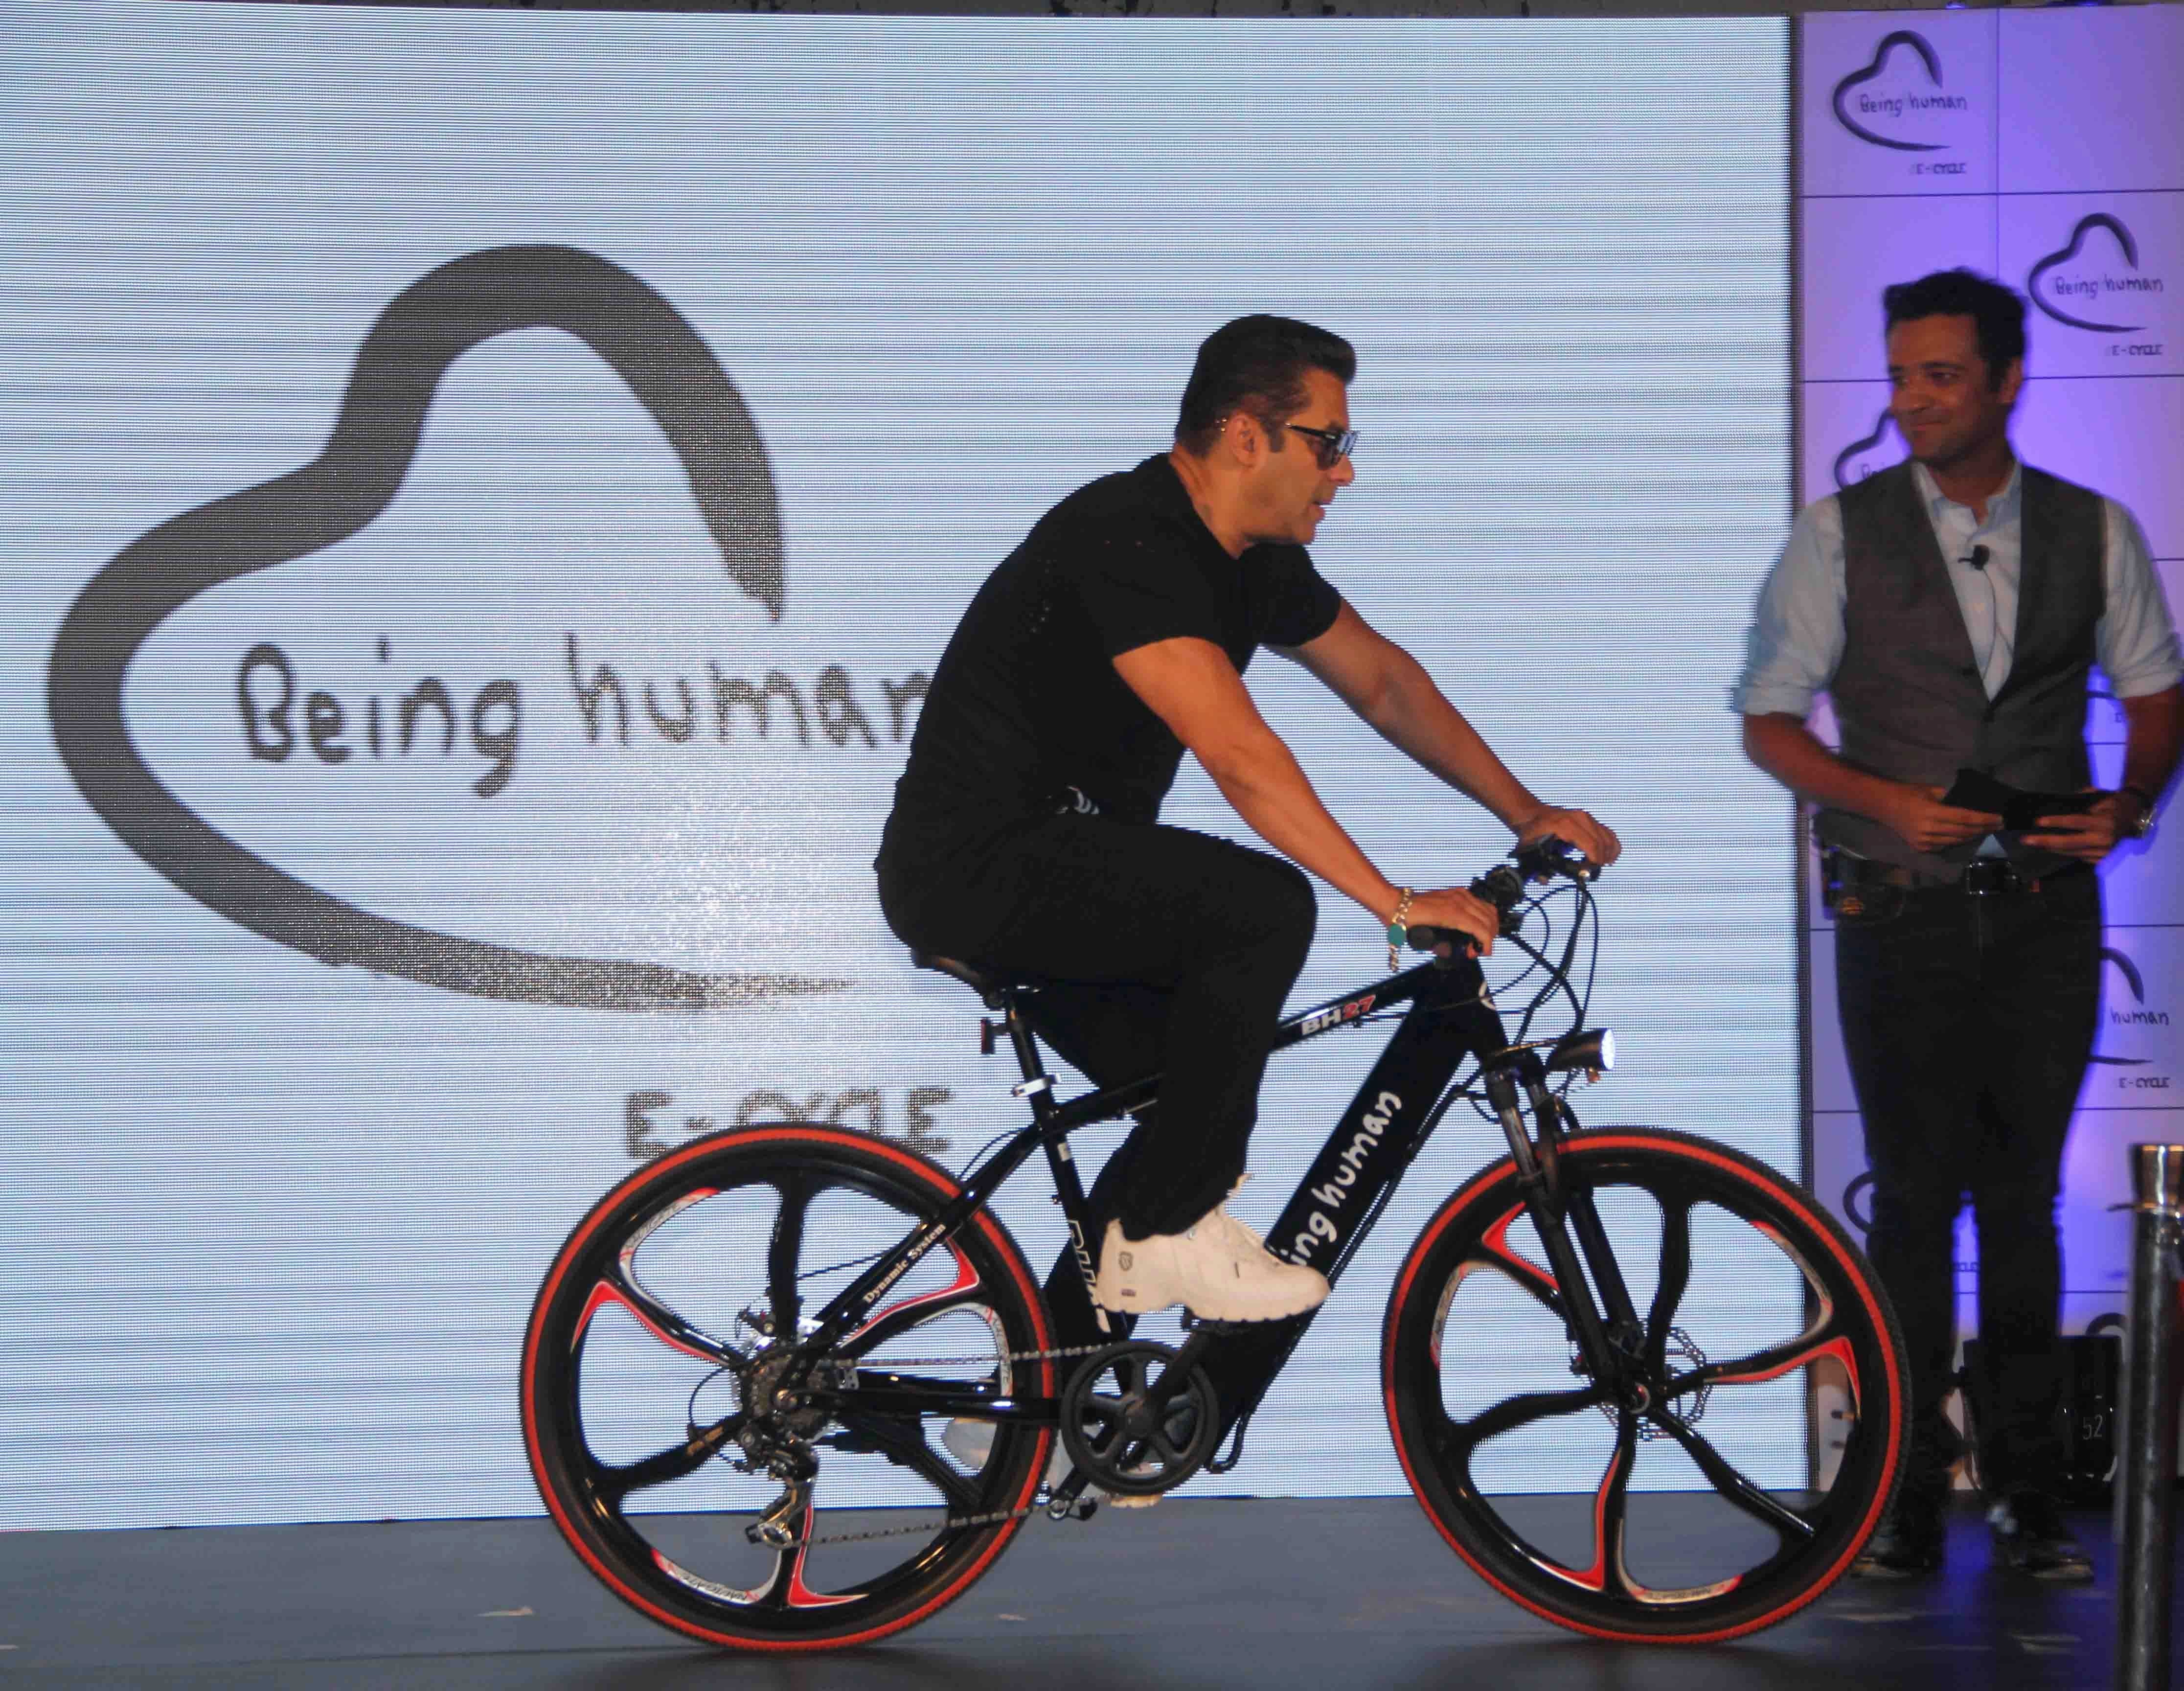 Being Human E-Cycle - Model BH27